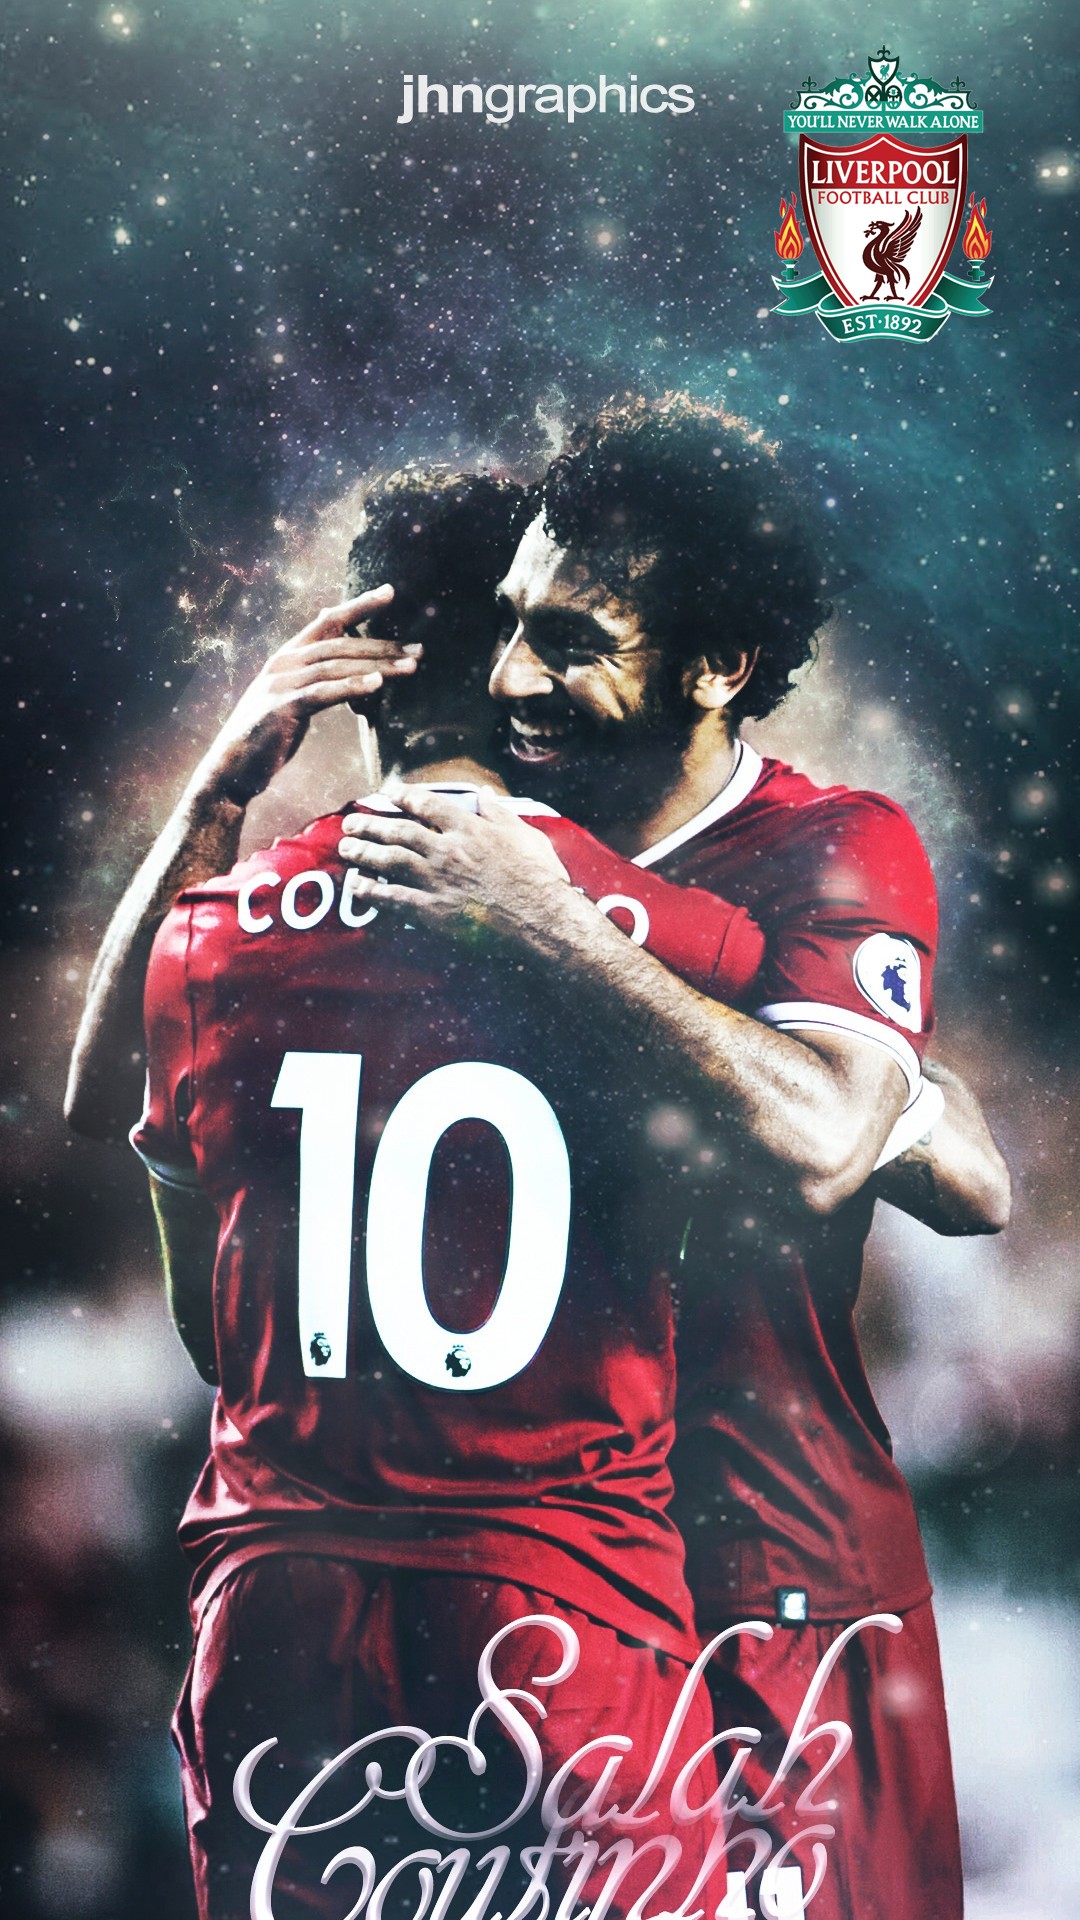 iPhone 7 Wallpaper Liverpool Mohamed Salah with image resolution 1080x1920 pixel. You can make this wallpaper for your iPhone 5, 6, 7, 8, X backgrounds, Mobile Screensaver, or iPad Lock Screen